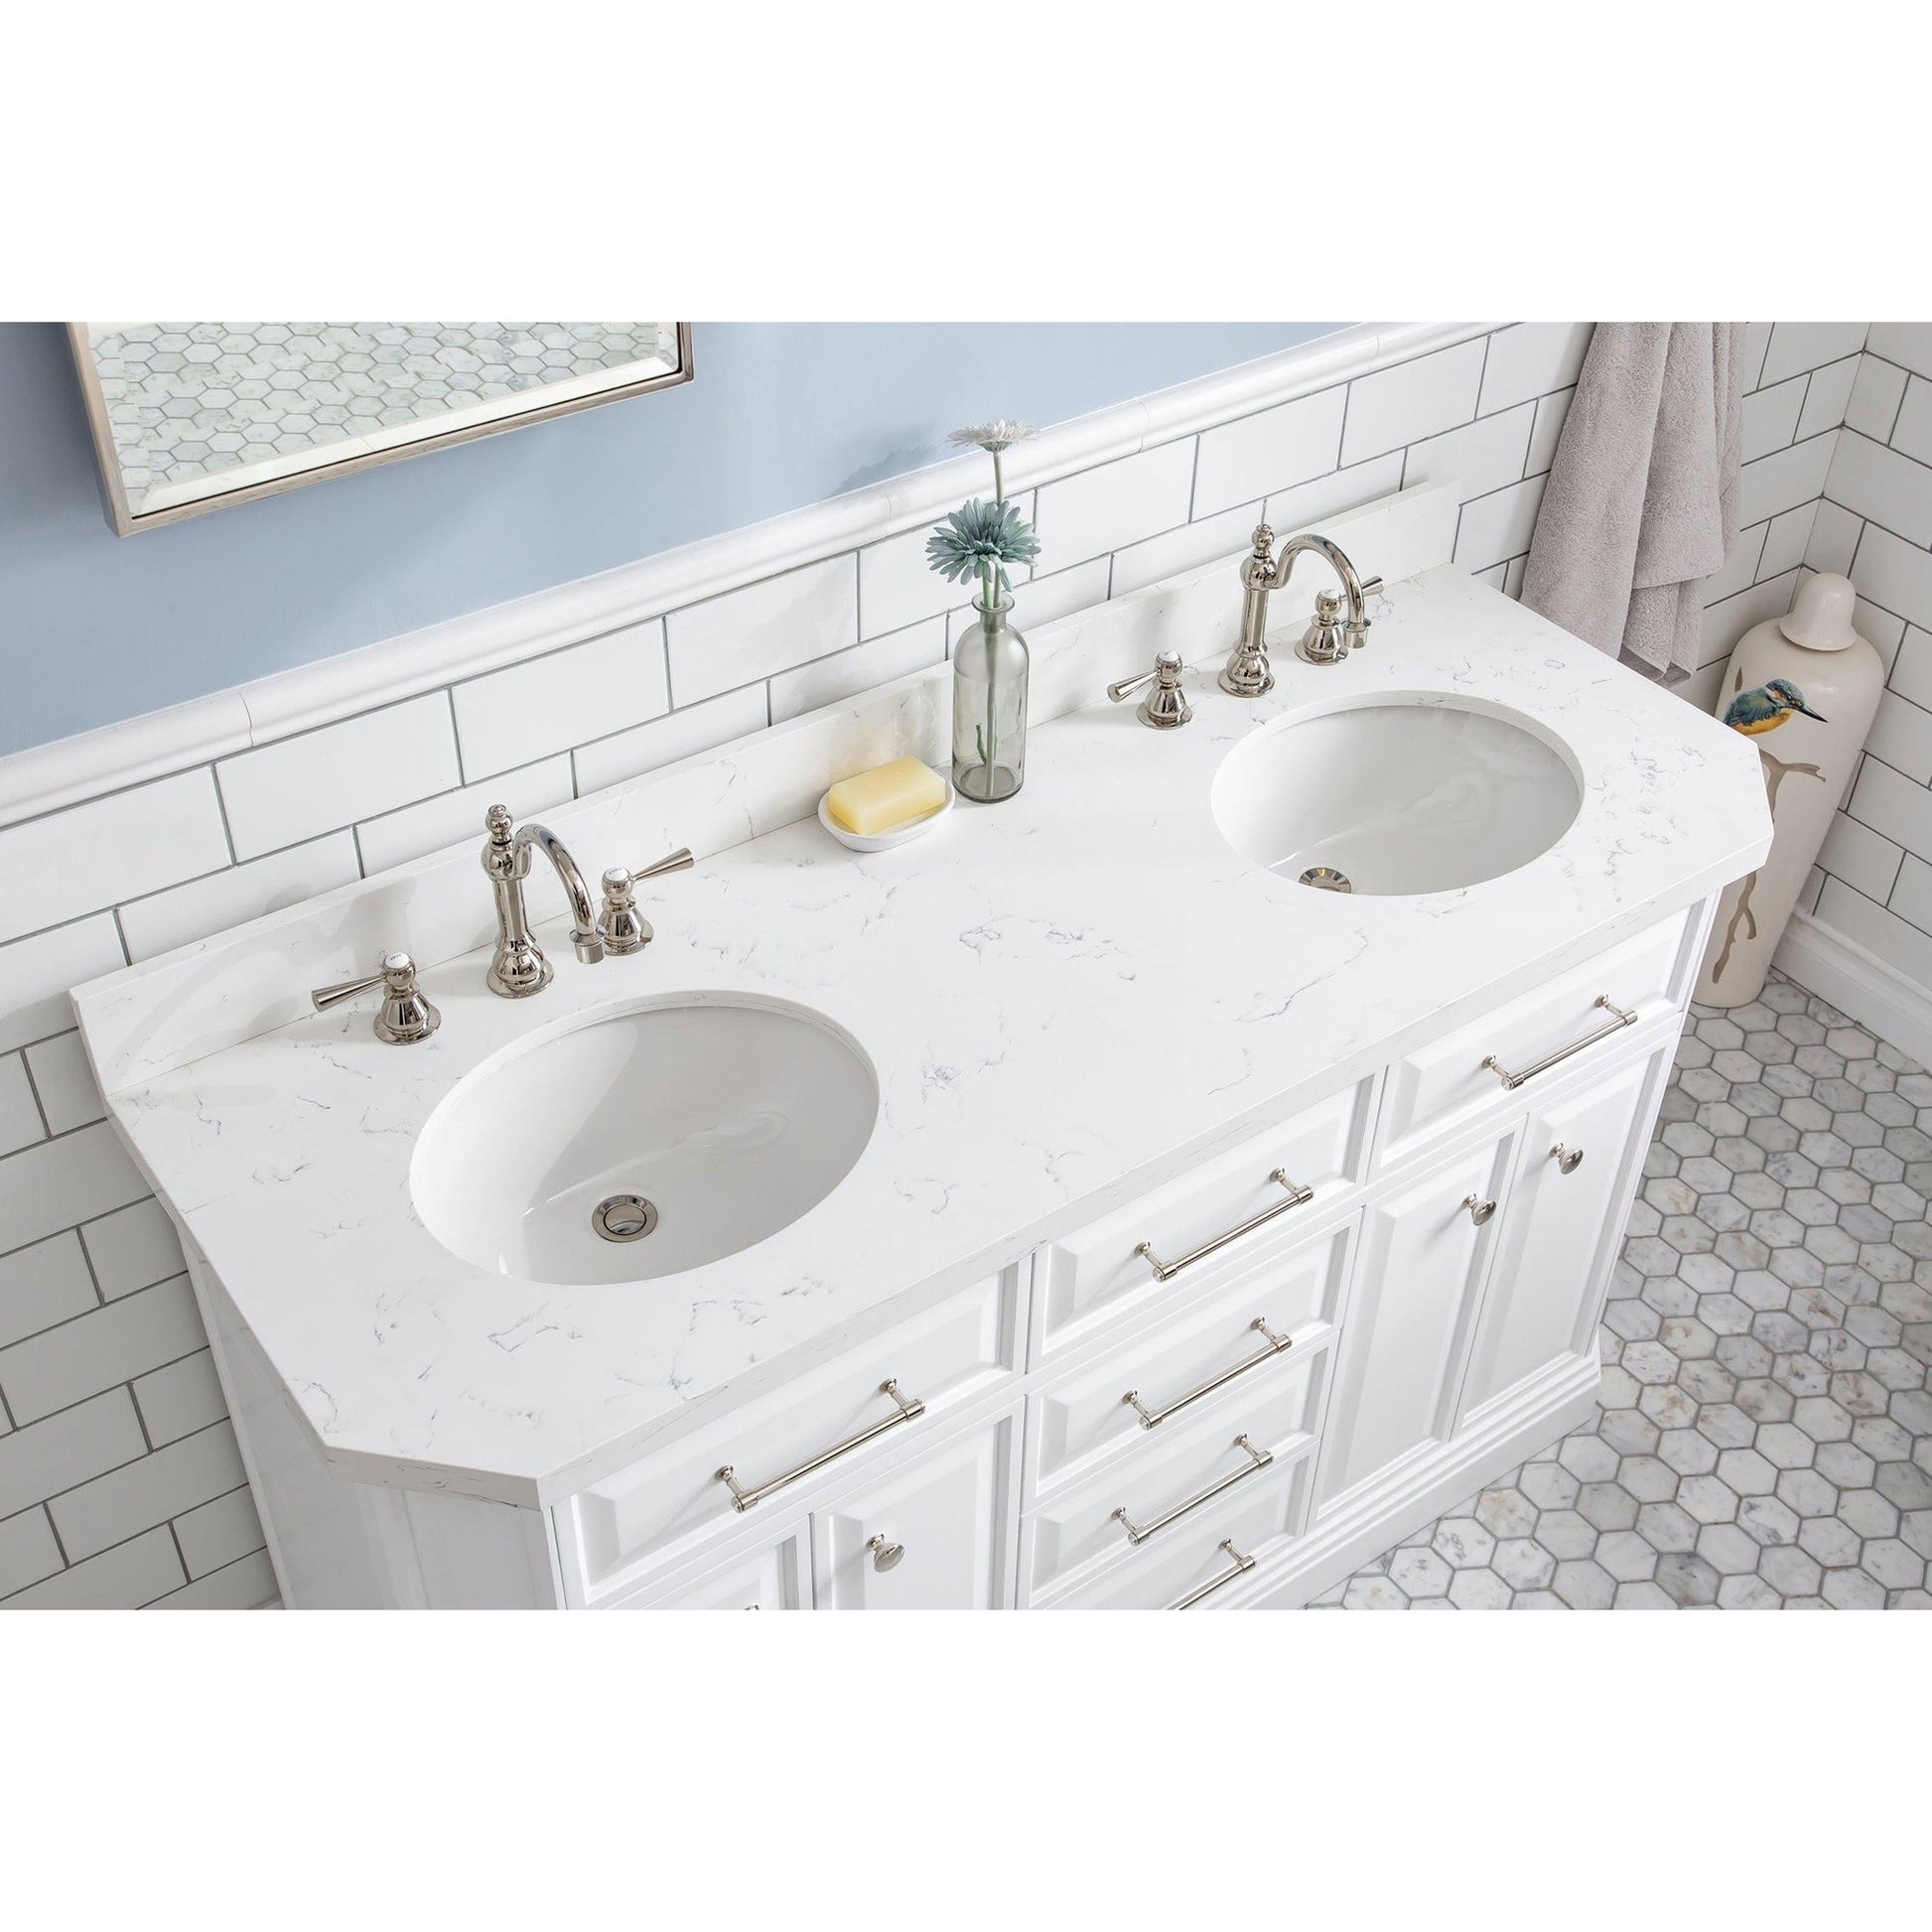 Water Creation Palace 60" Quartz Carrara Pure White Bathroom Vanity Set With Hardware And F2-0012 Faucets in Polished Nickel (PVD) Finish